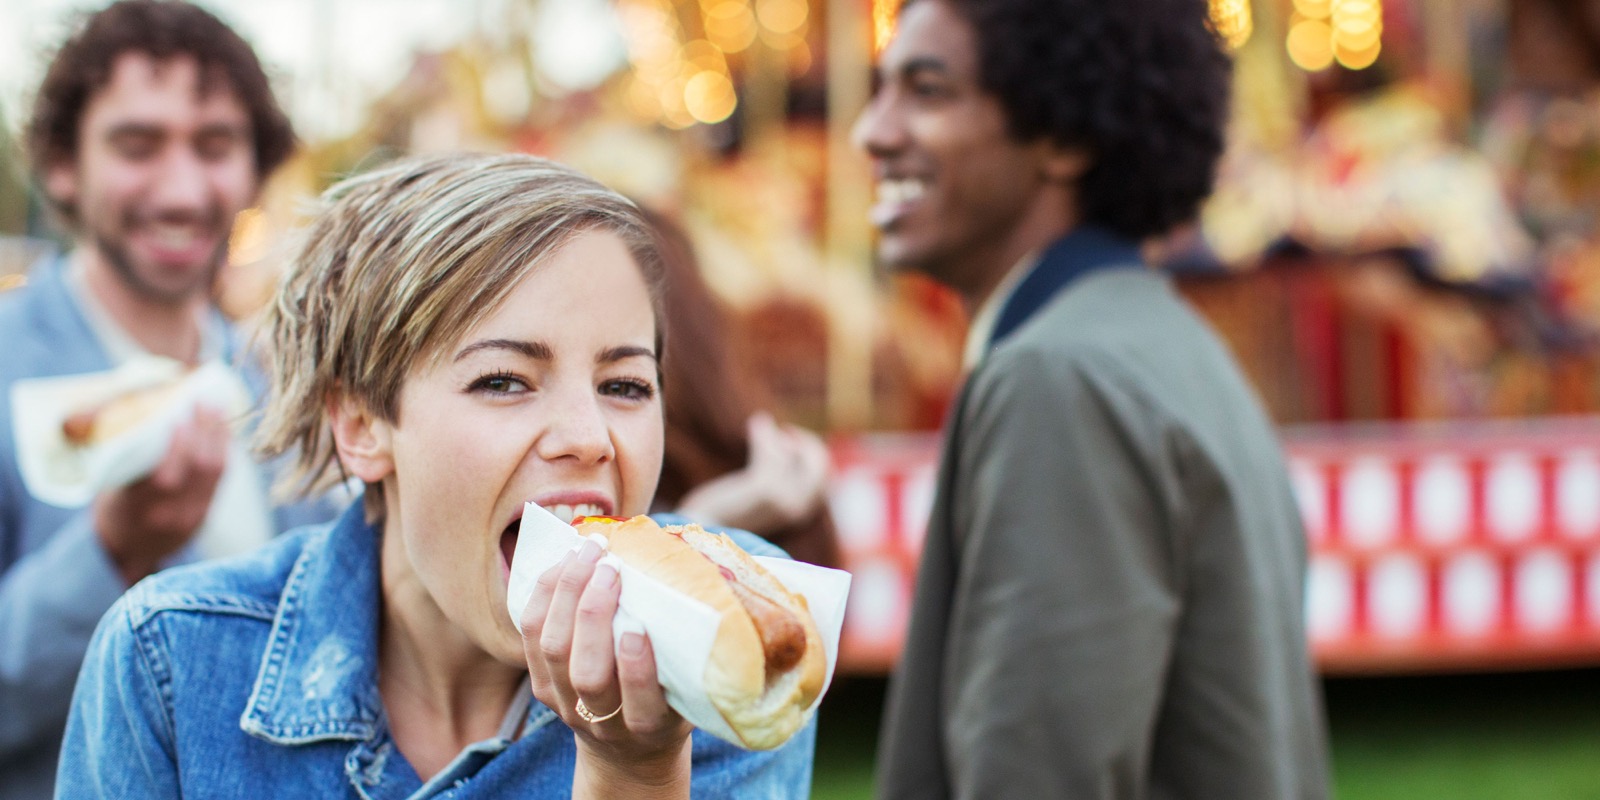 It’s Easy to Tell If You’re More American, British or Australian Just by Your Eating Habits Woman Eating Hot Dog